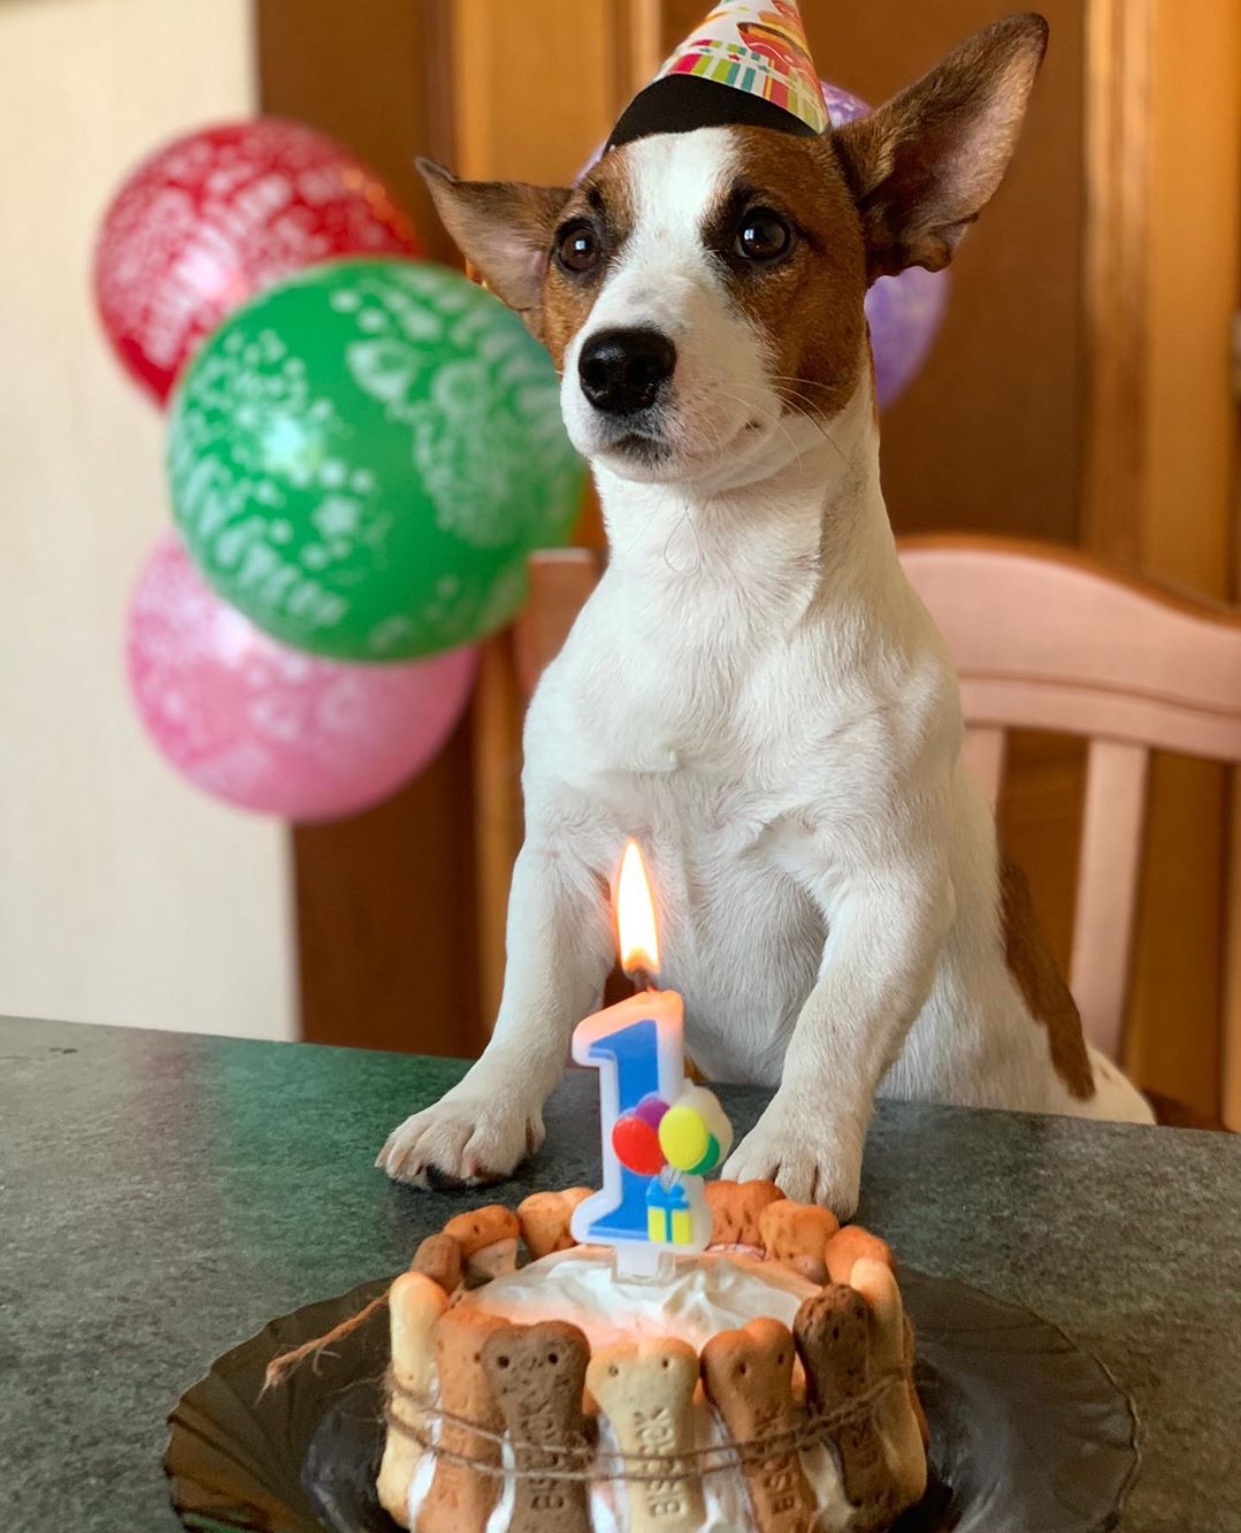 Jack Russell Terrier wearing a birthday cone hat while sitting on the chair behind its birthday cake on the table